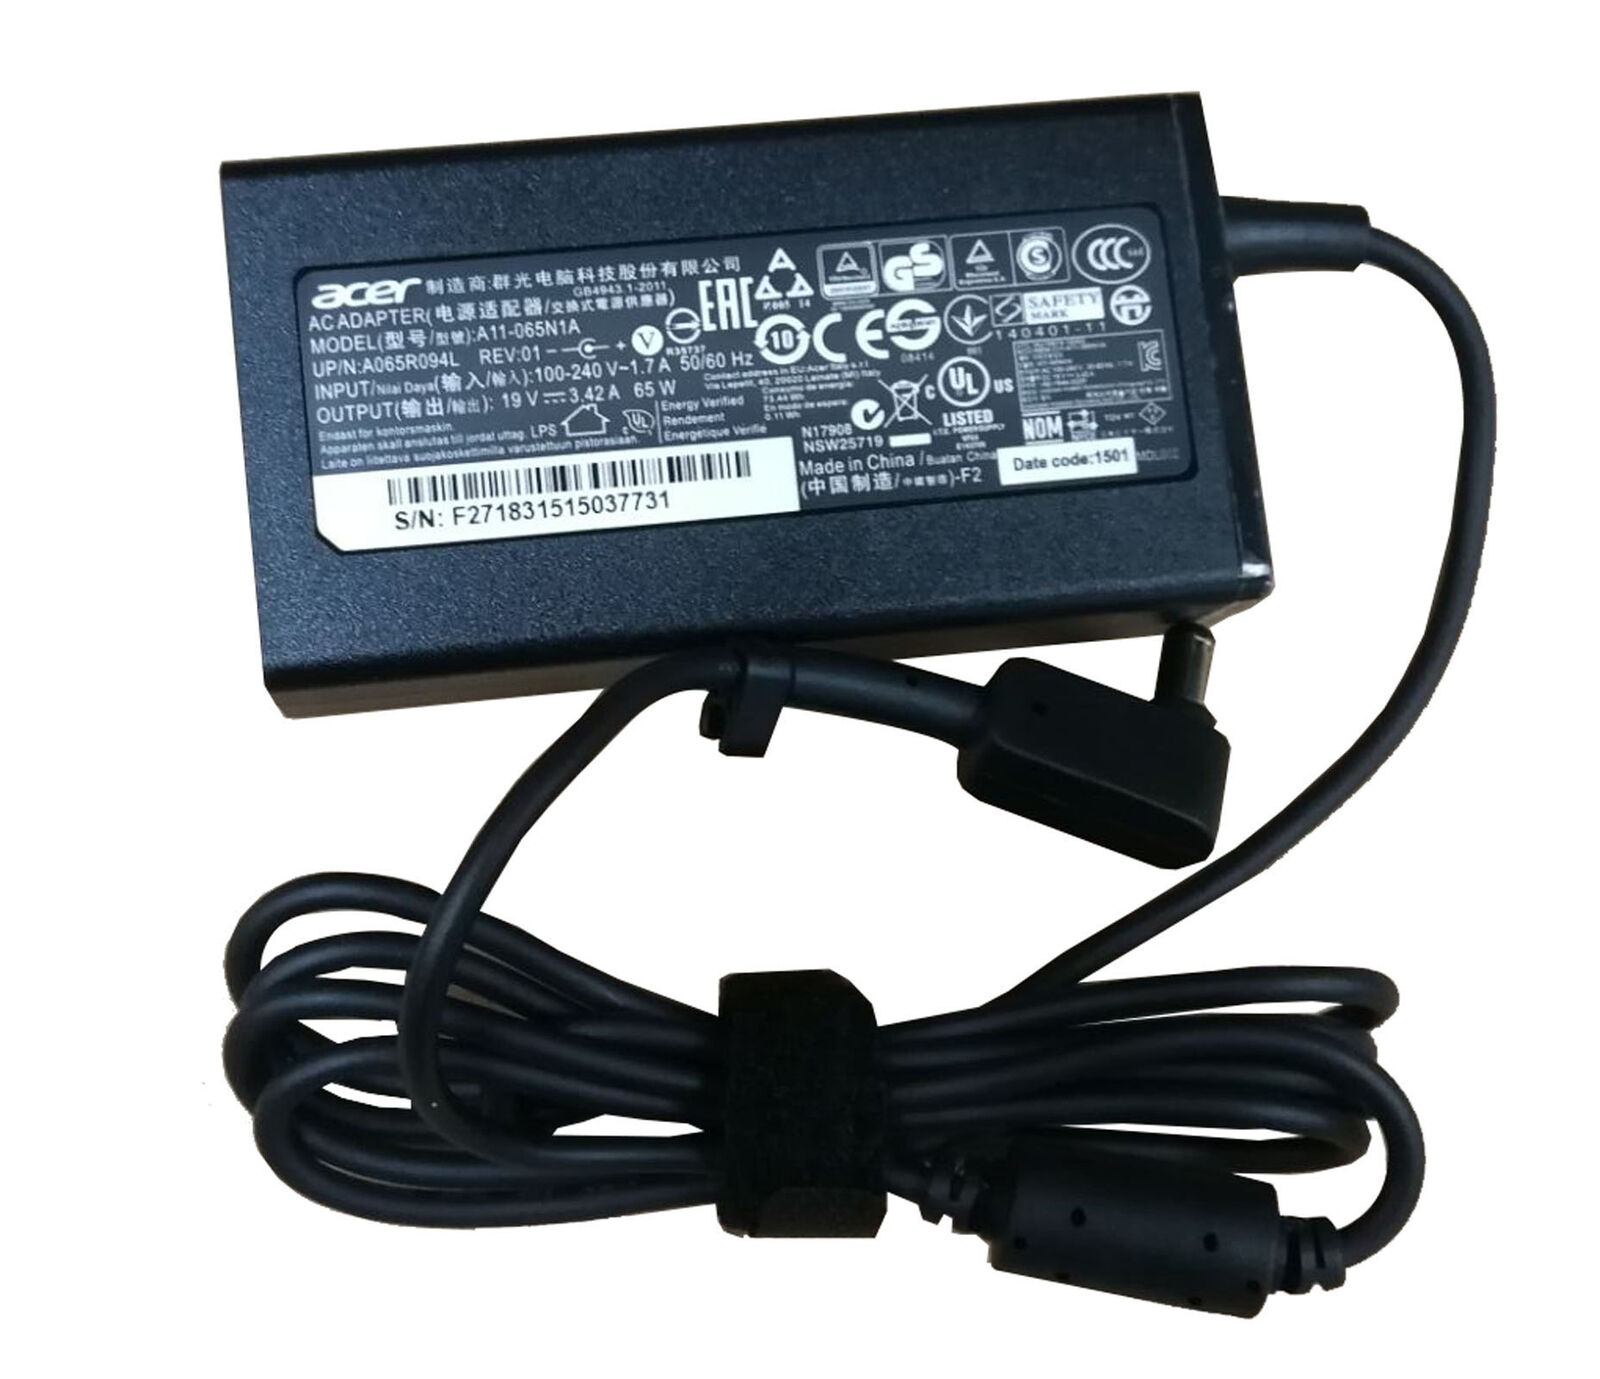 65W Acer Chromebook C720-3871 Charger AC Adapter Power Cord